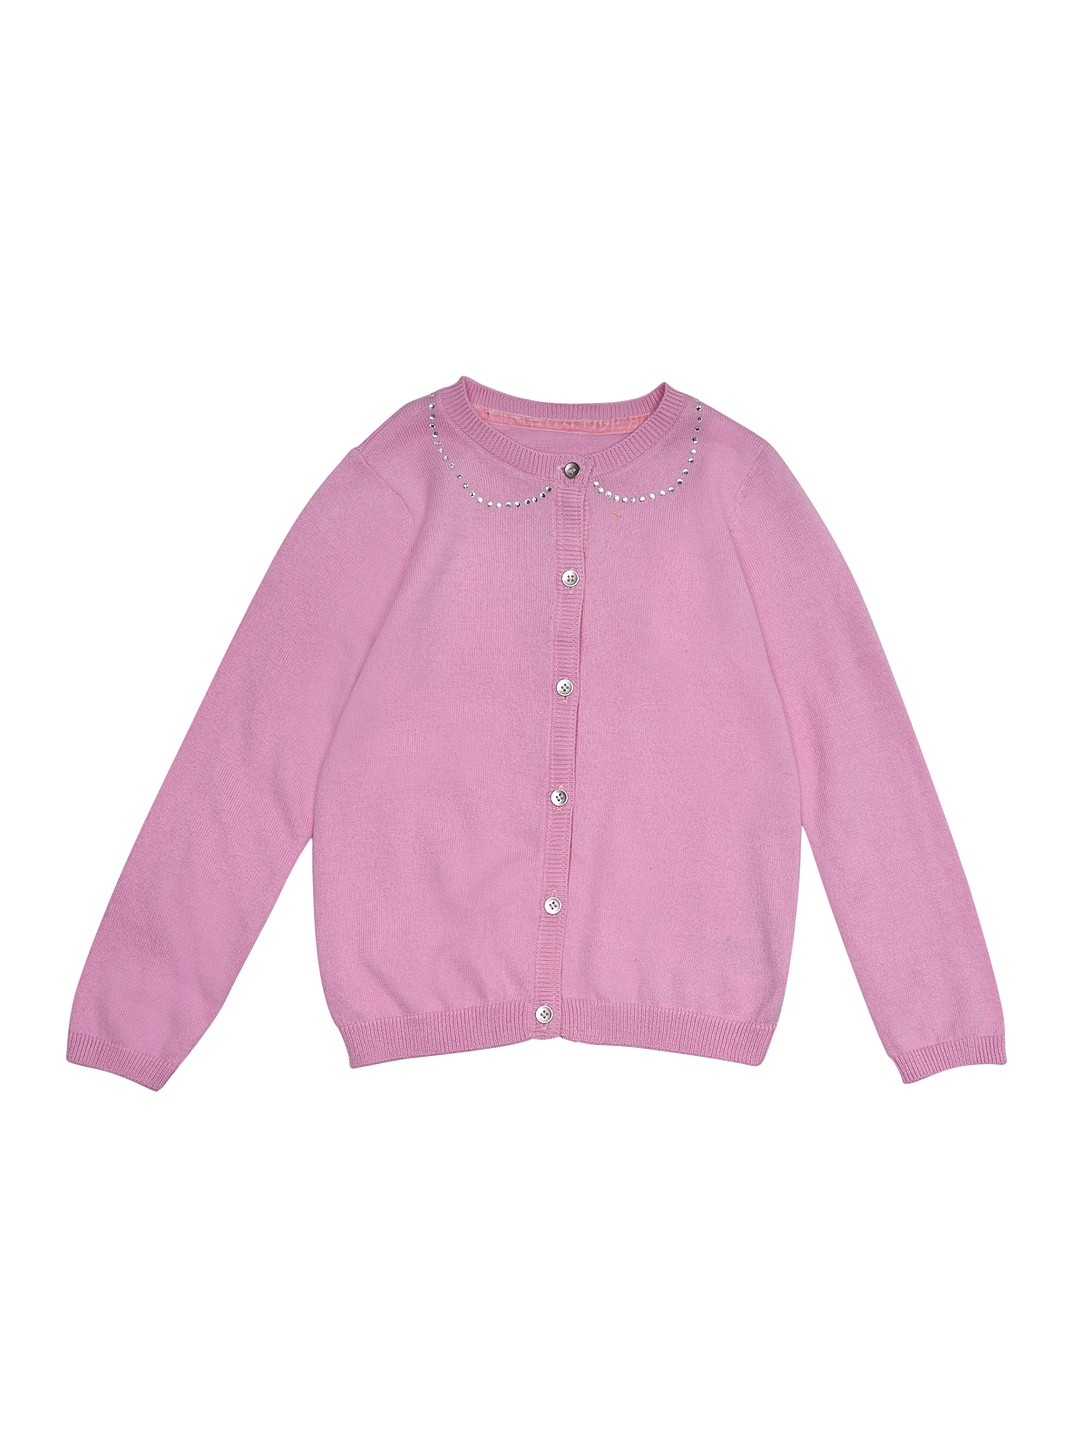 Buy Mothercare Girls Pink Cardigan - Sweaters for Girls 1703651 | Myntra